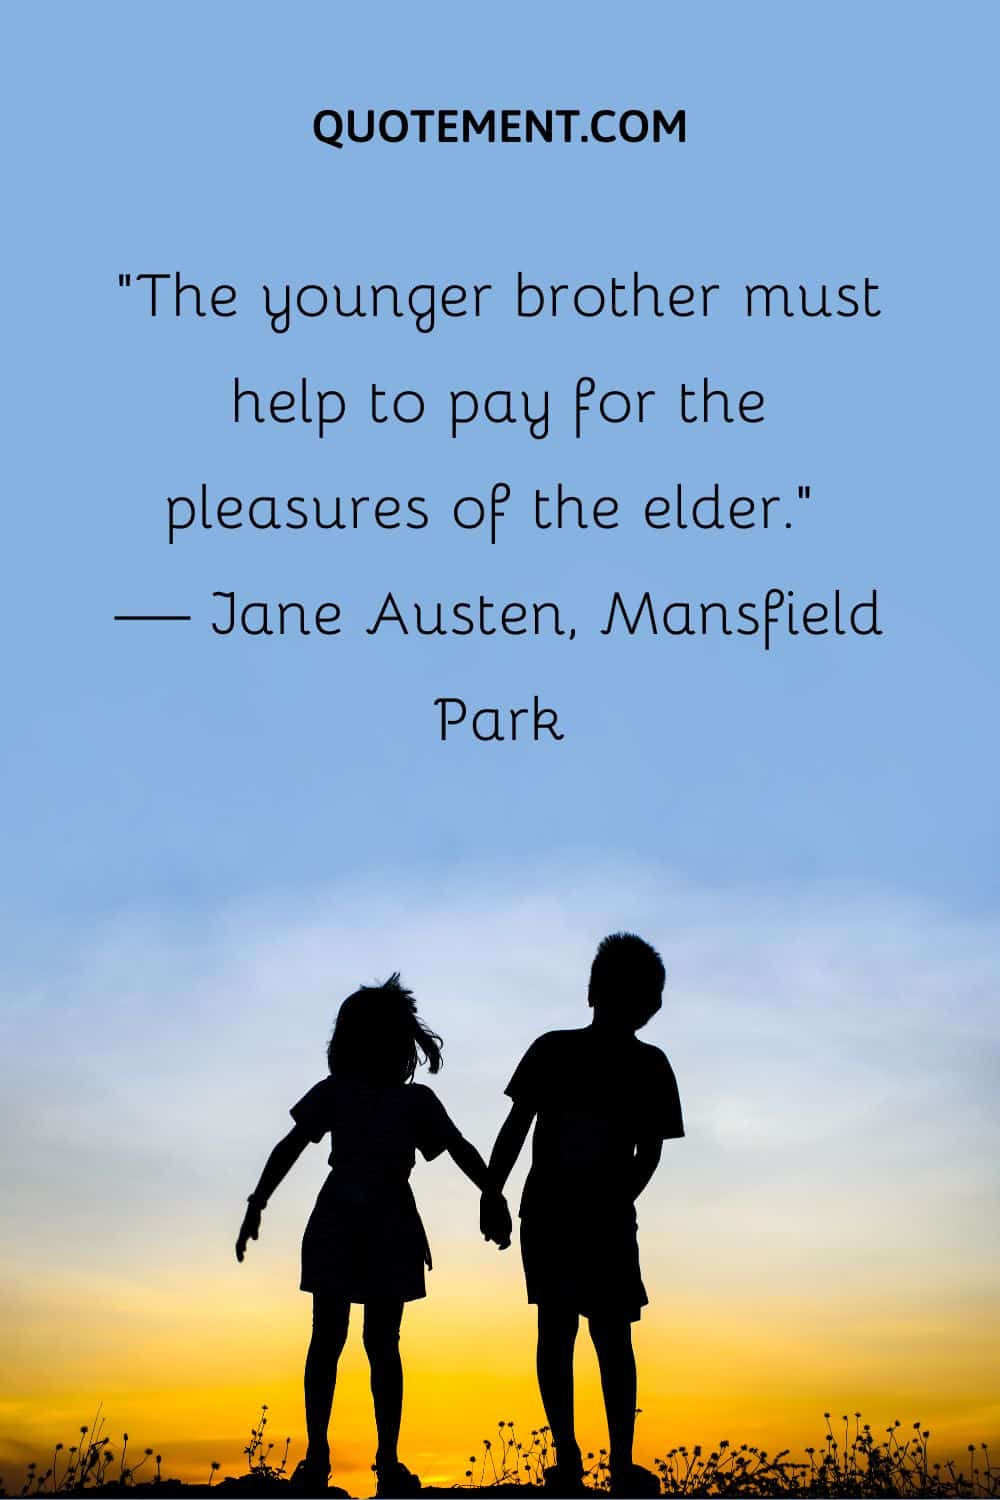 “The younger brother must help to pay for the pleasures of the elder.” — Jane Austen, Mansfield Park